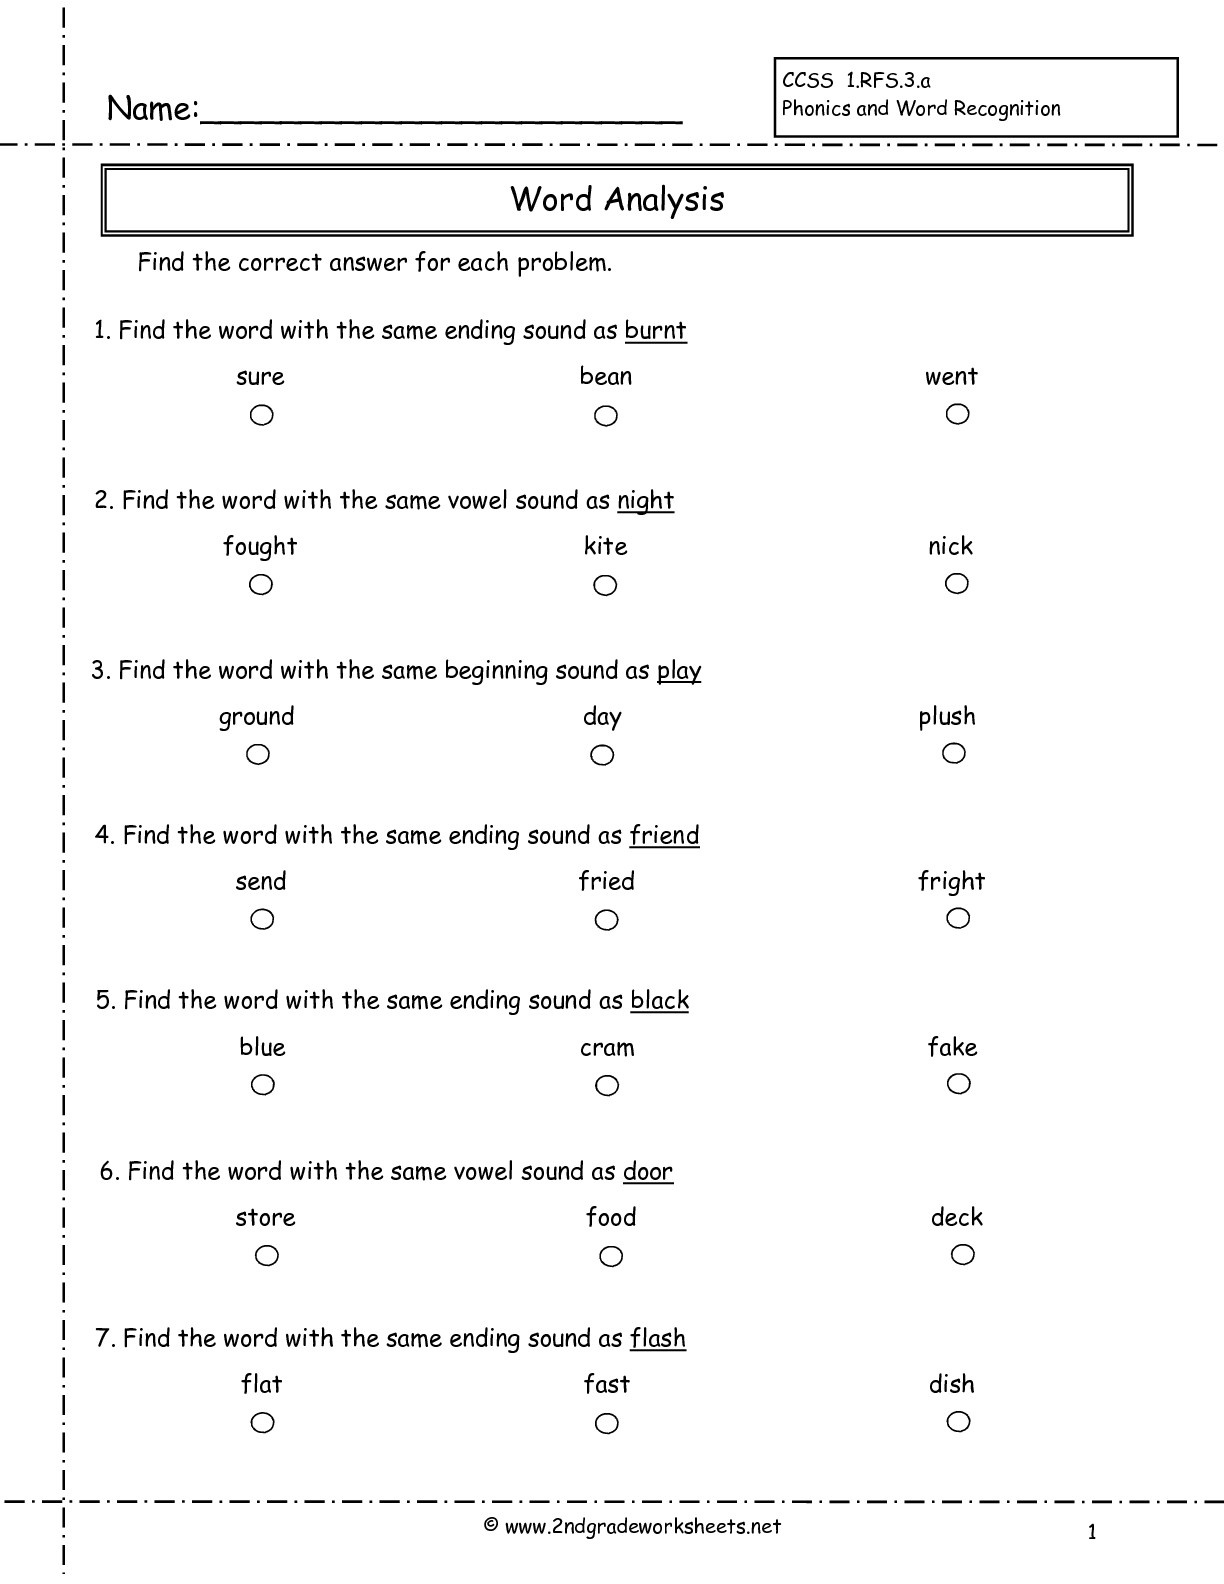 phonics-worksheets-2nd-grade-printable-word-searches